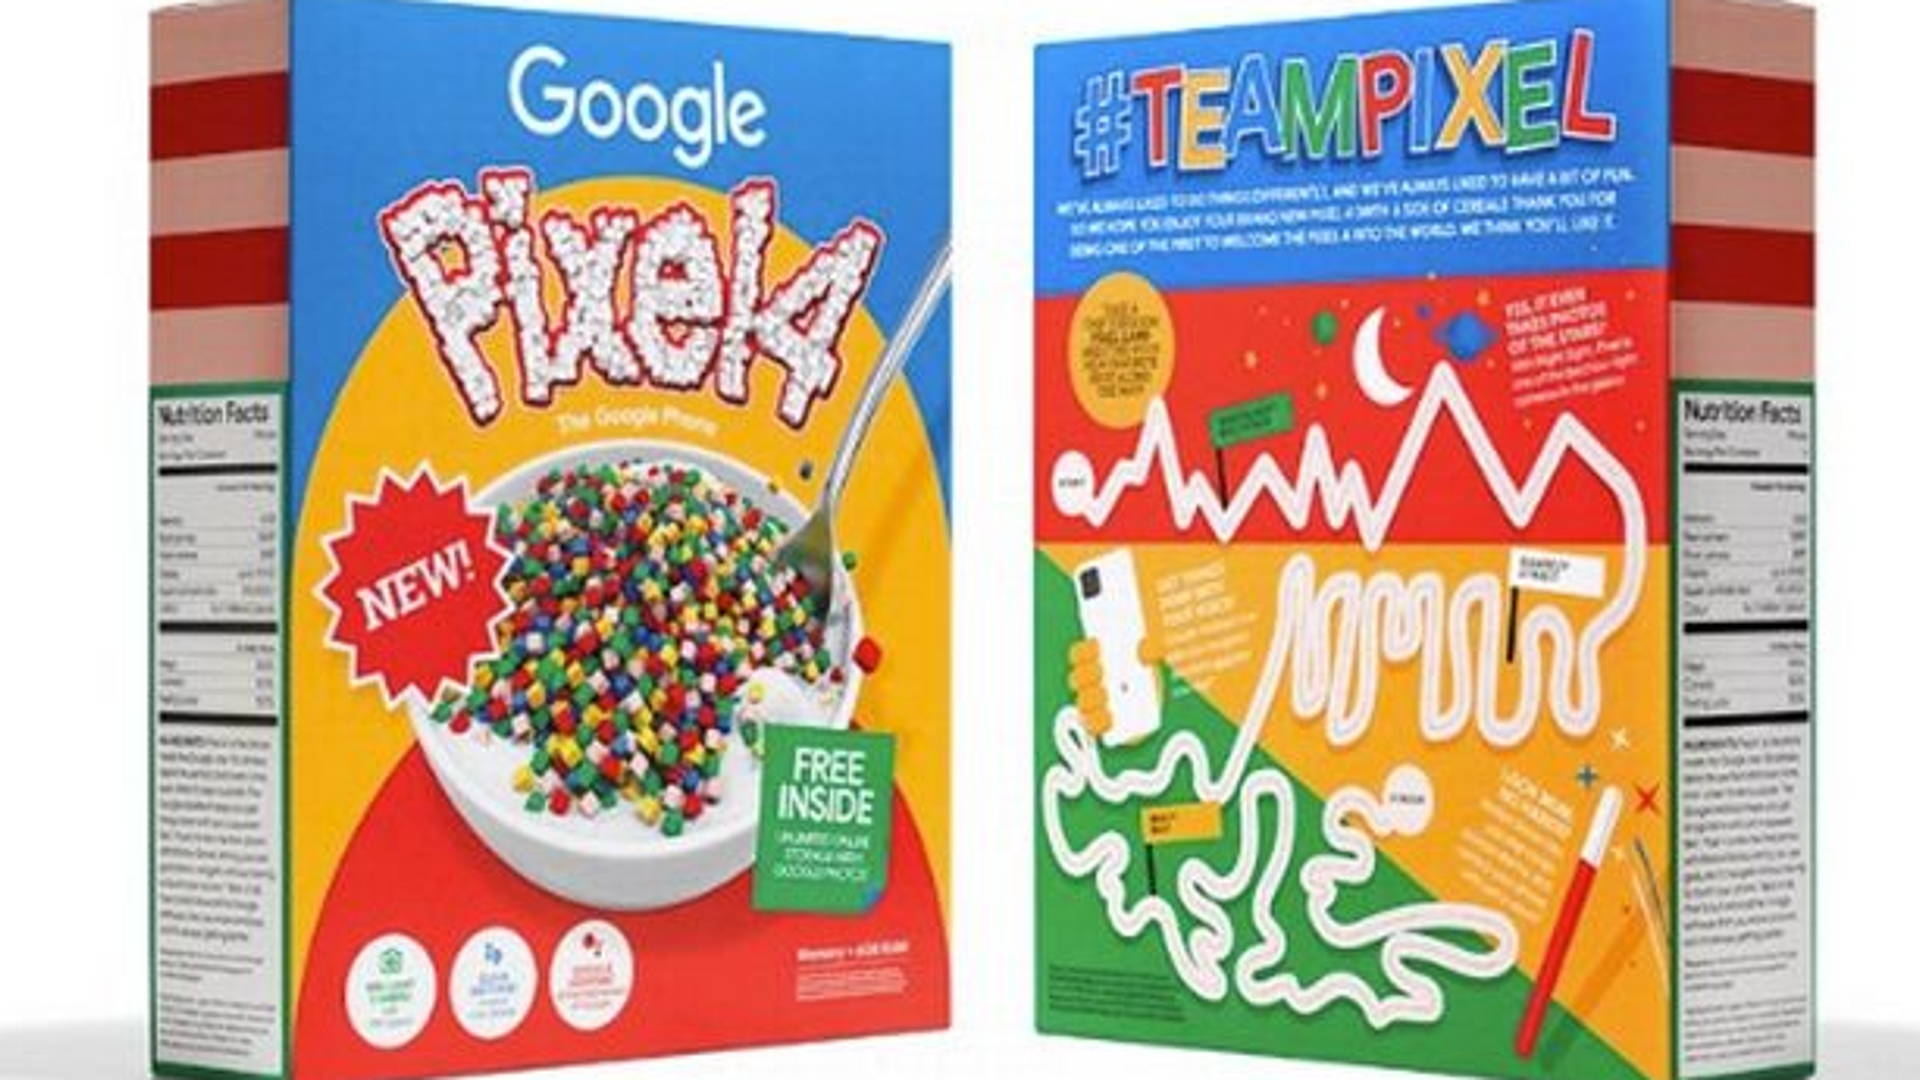 Featured image for Google UK Ships Pre-Ordered Pixel Phones In Cereal Boxes